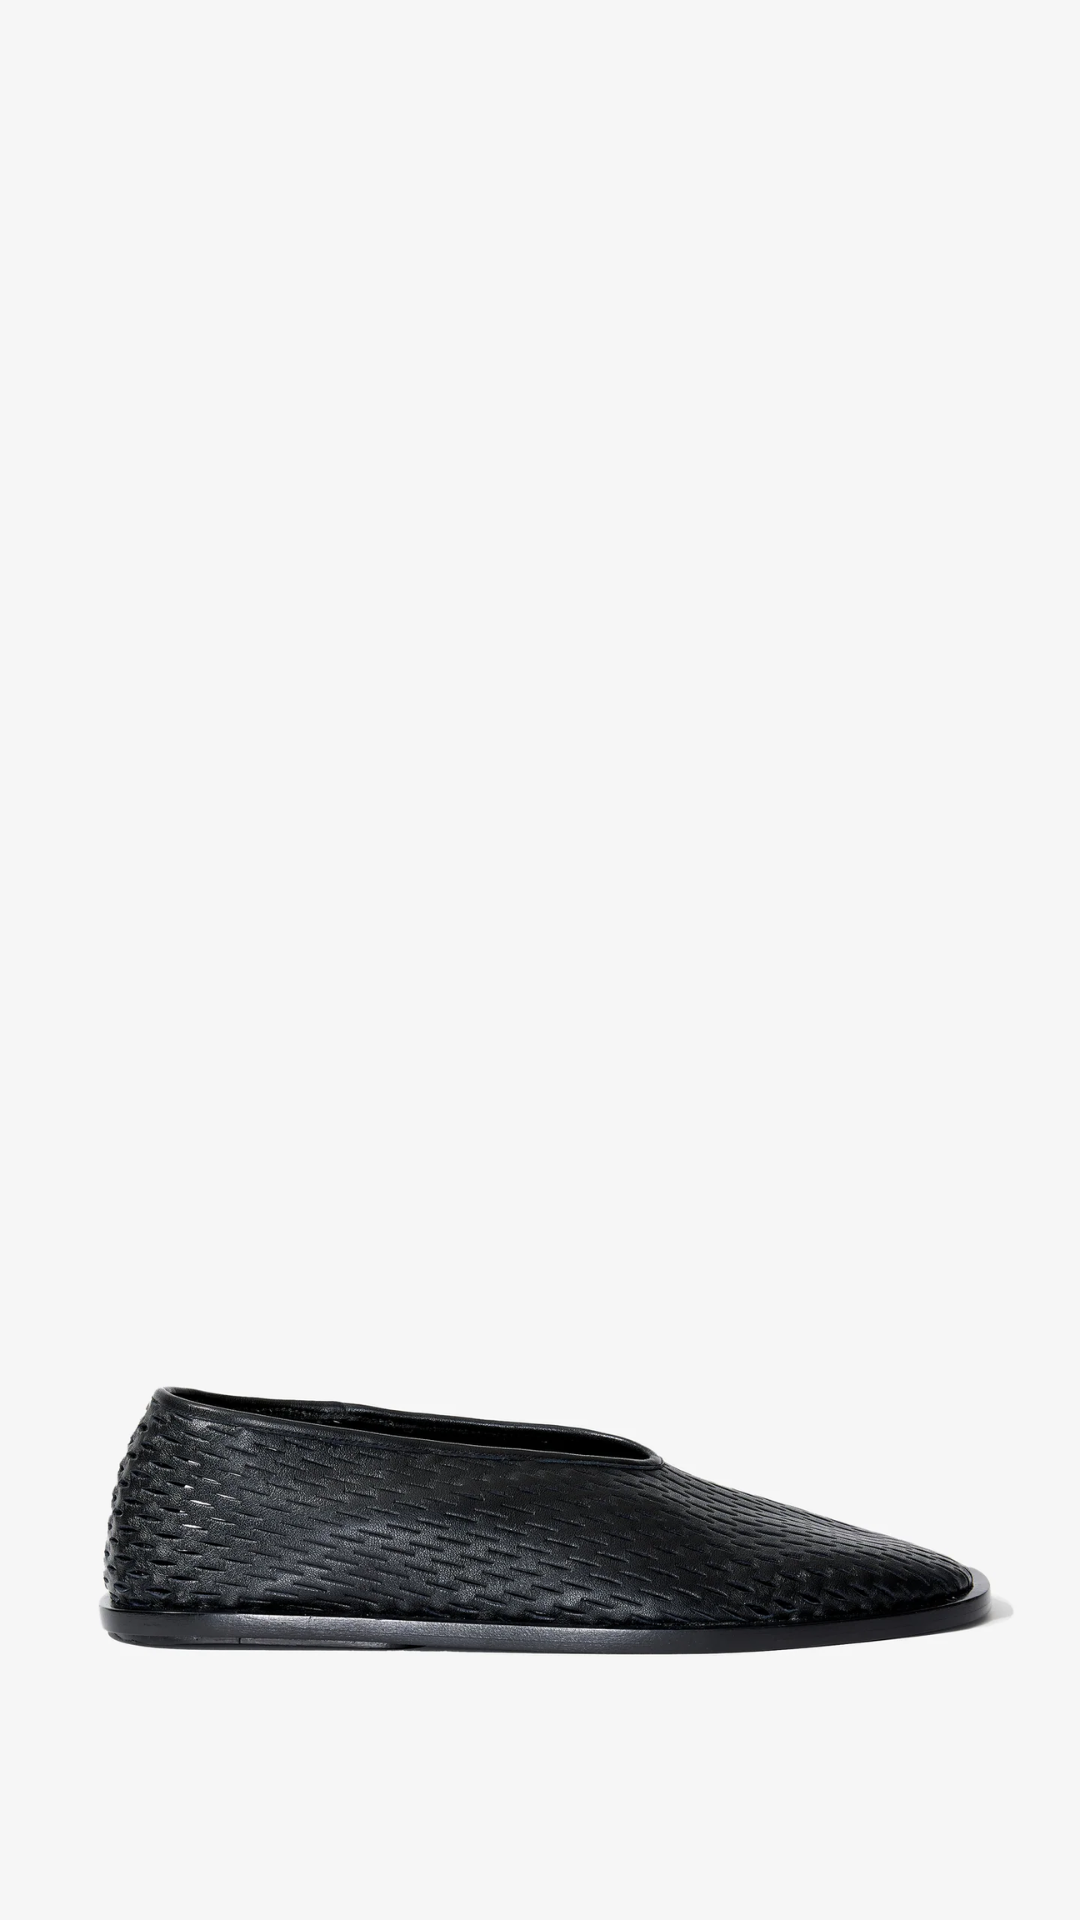 Proenza Schoeler Square Perforated Slippers